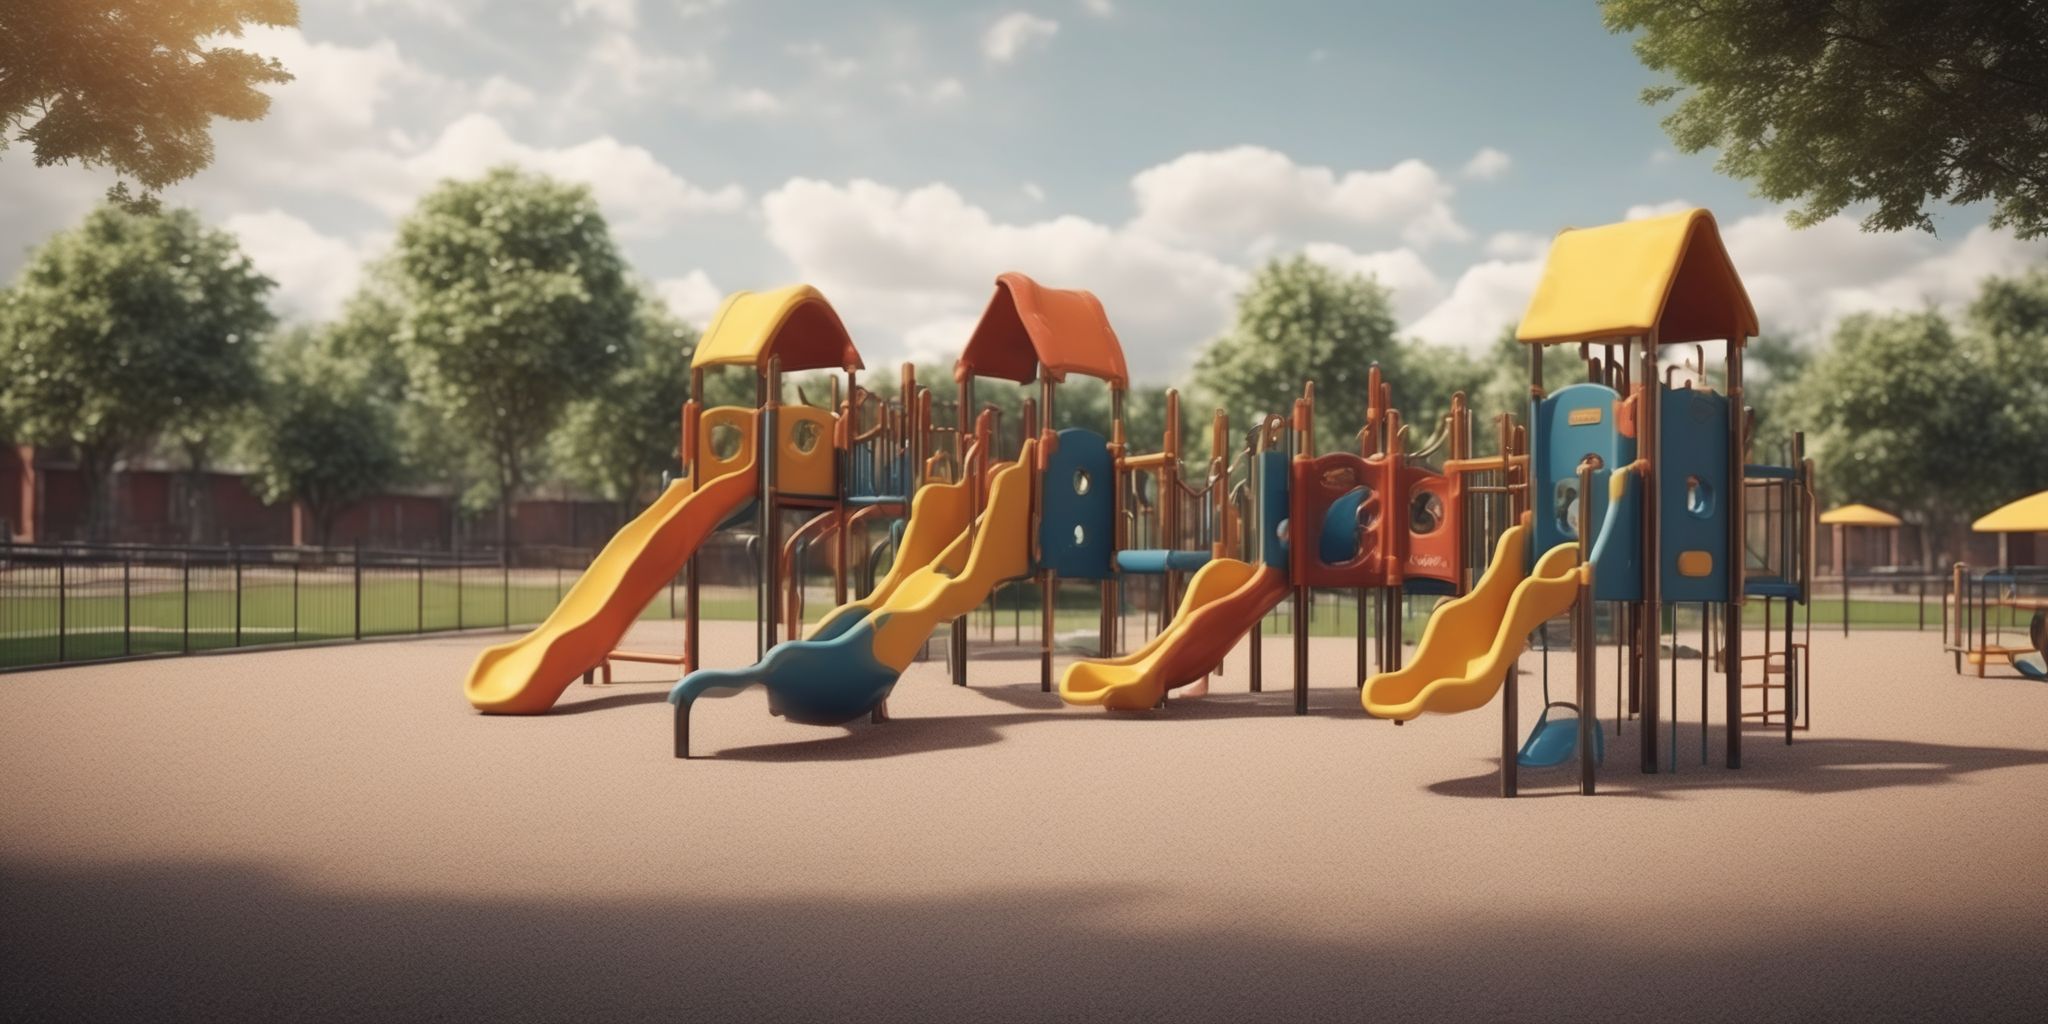 Playground  in realistic, photographic style